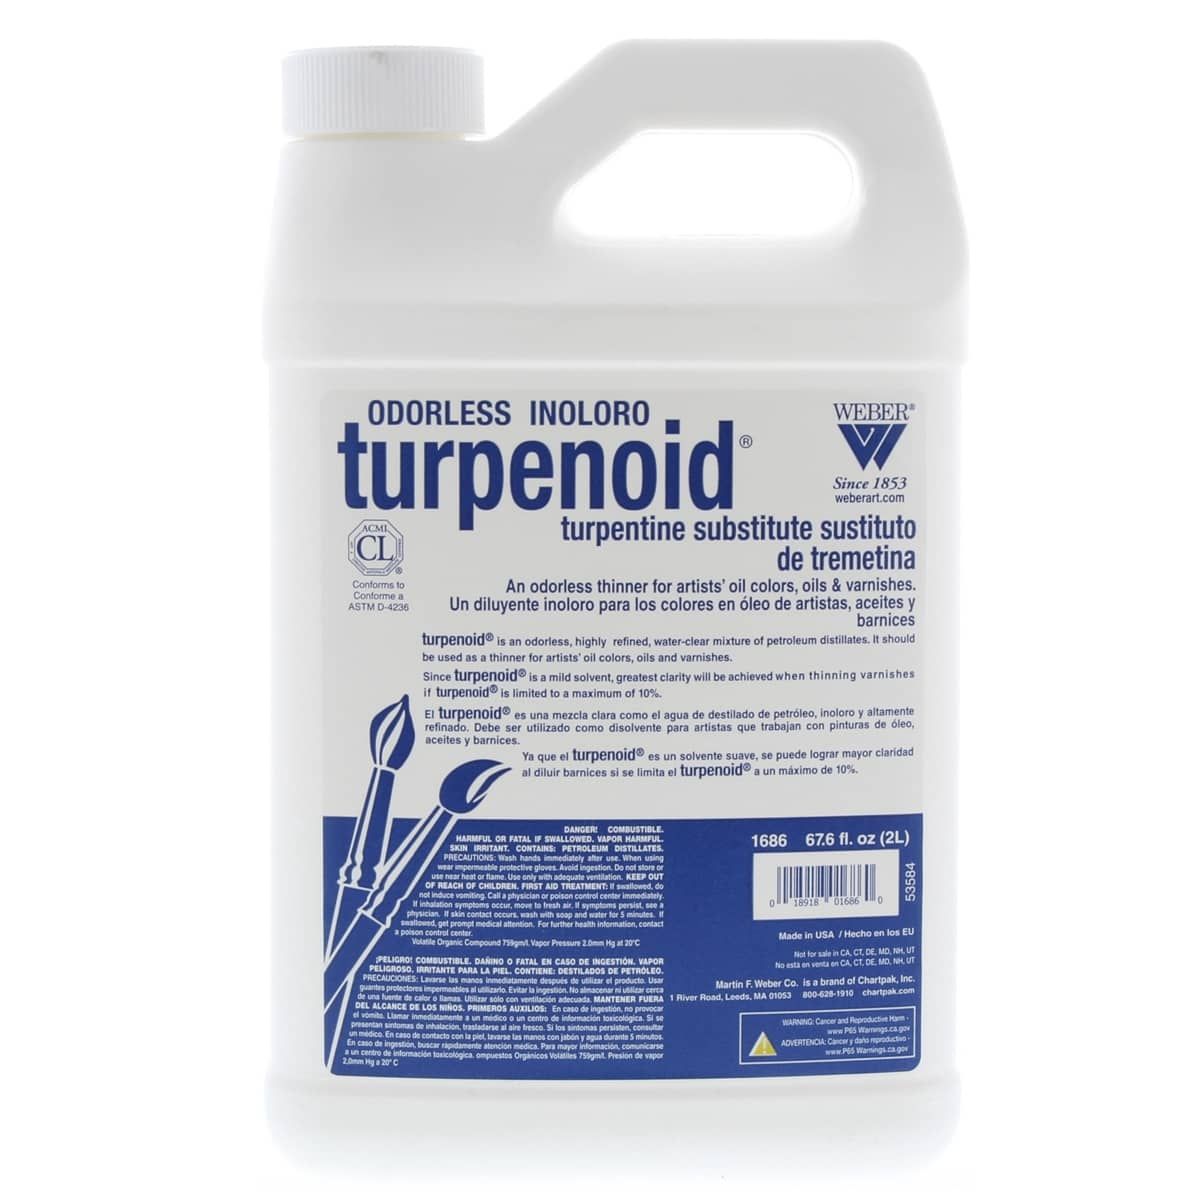 Odorless turpentine for painting and diluting oil paints Cherkov art